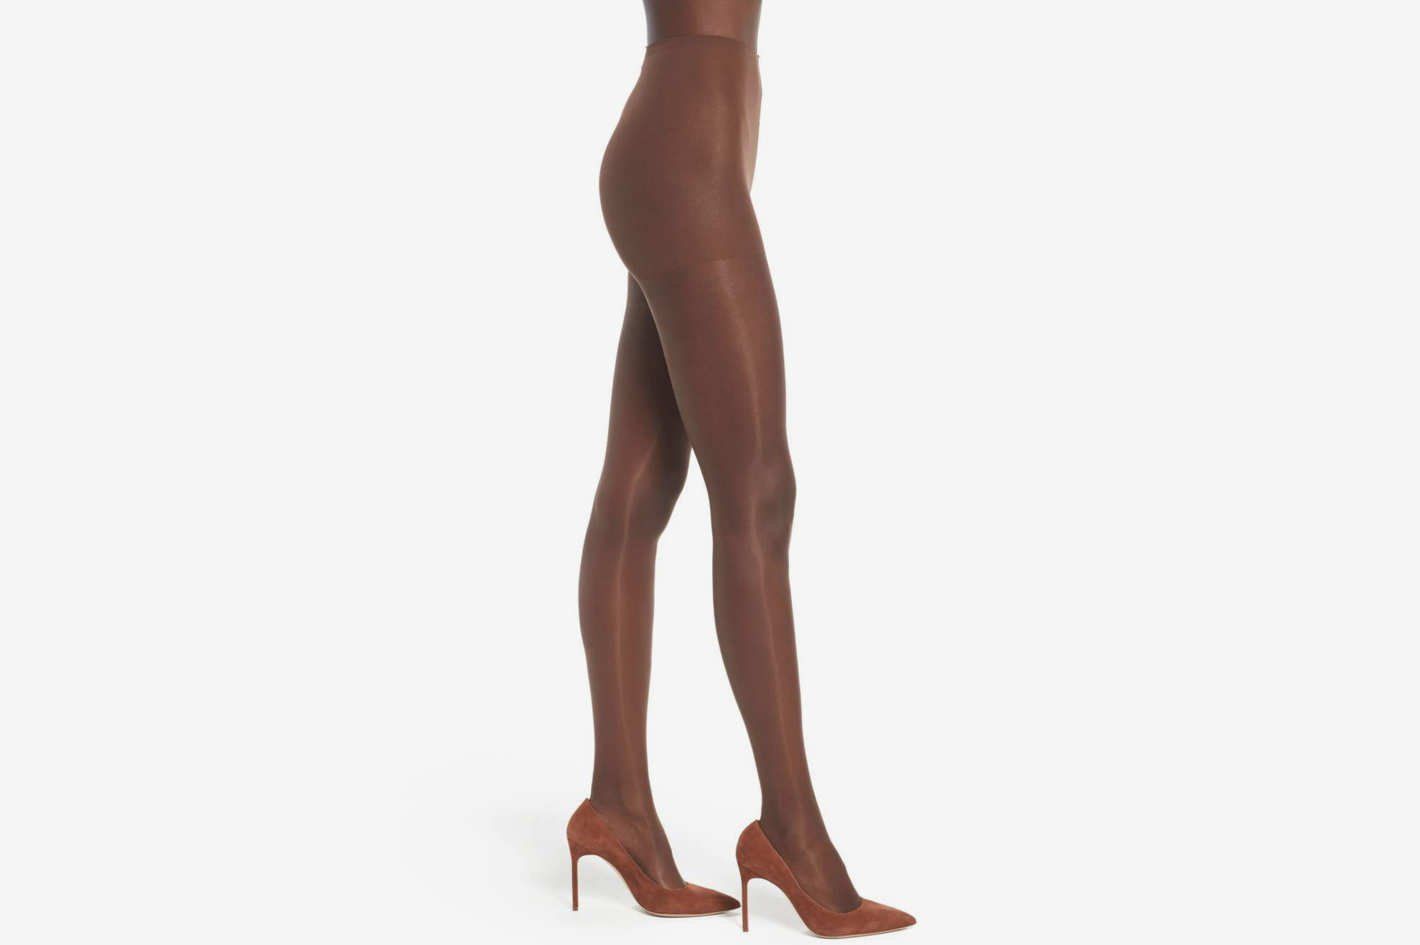 Popularity of pantyhose